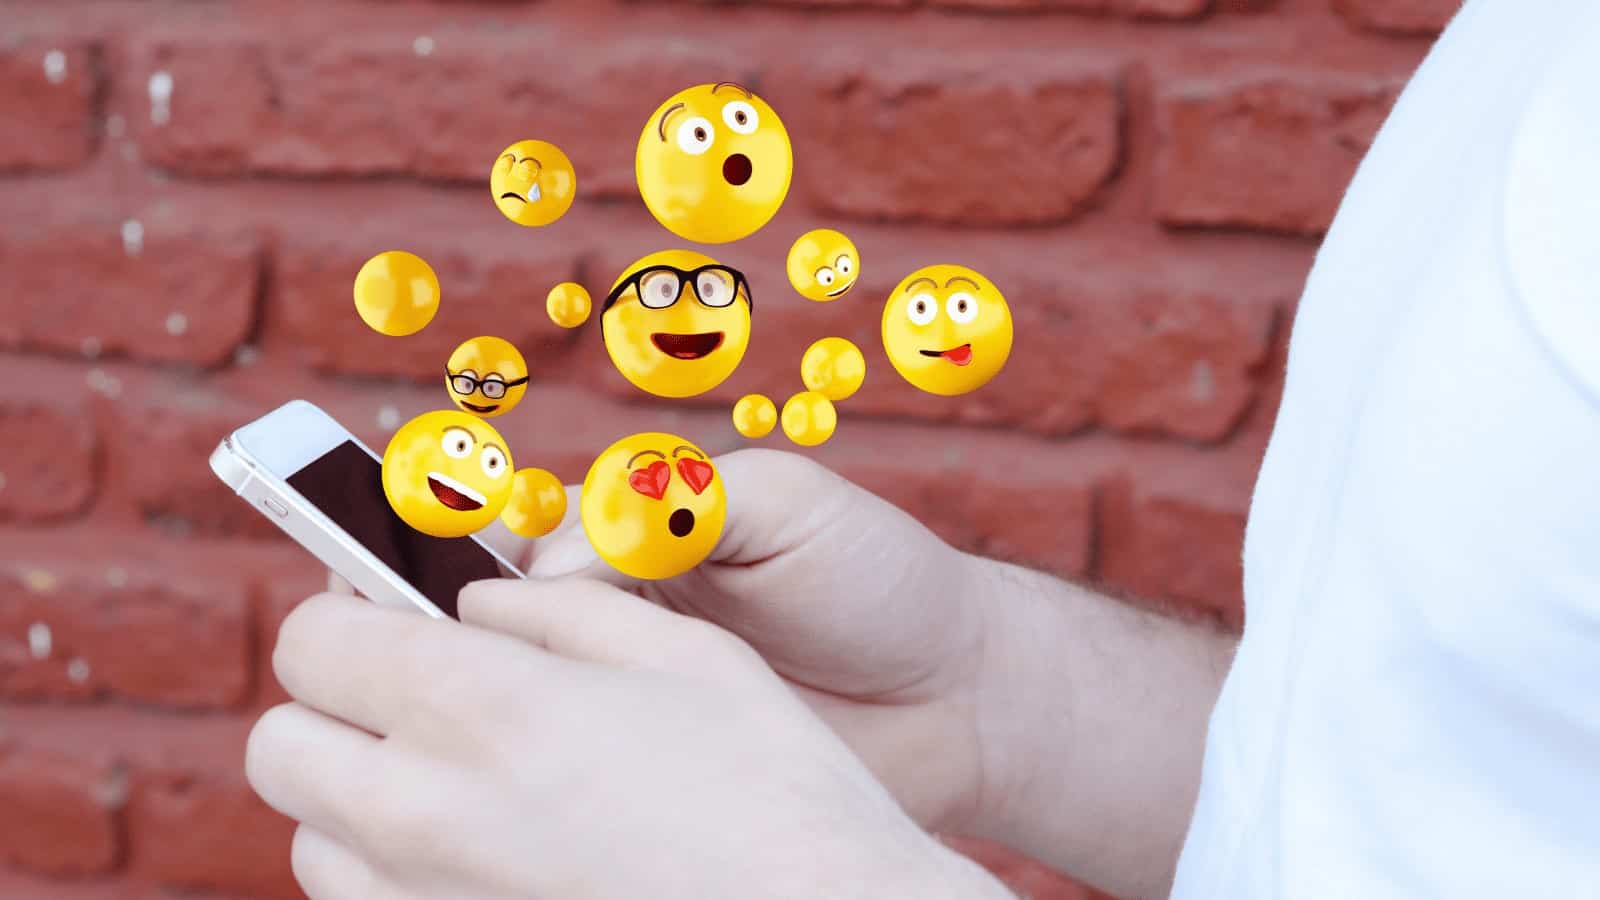 Mass General Physicians Propose Using Emojis for a Communication Tool 